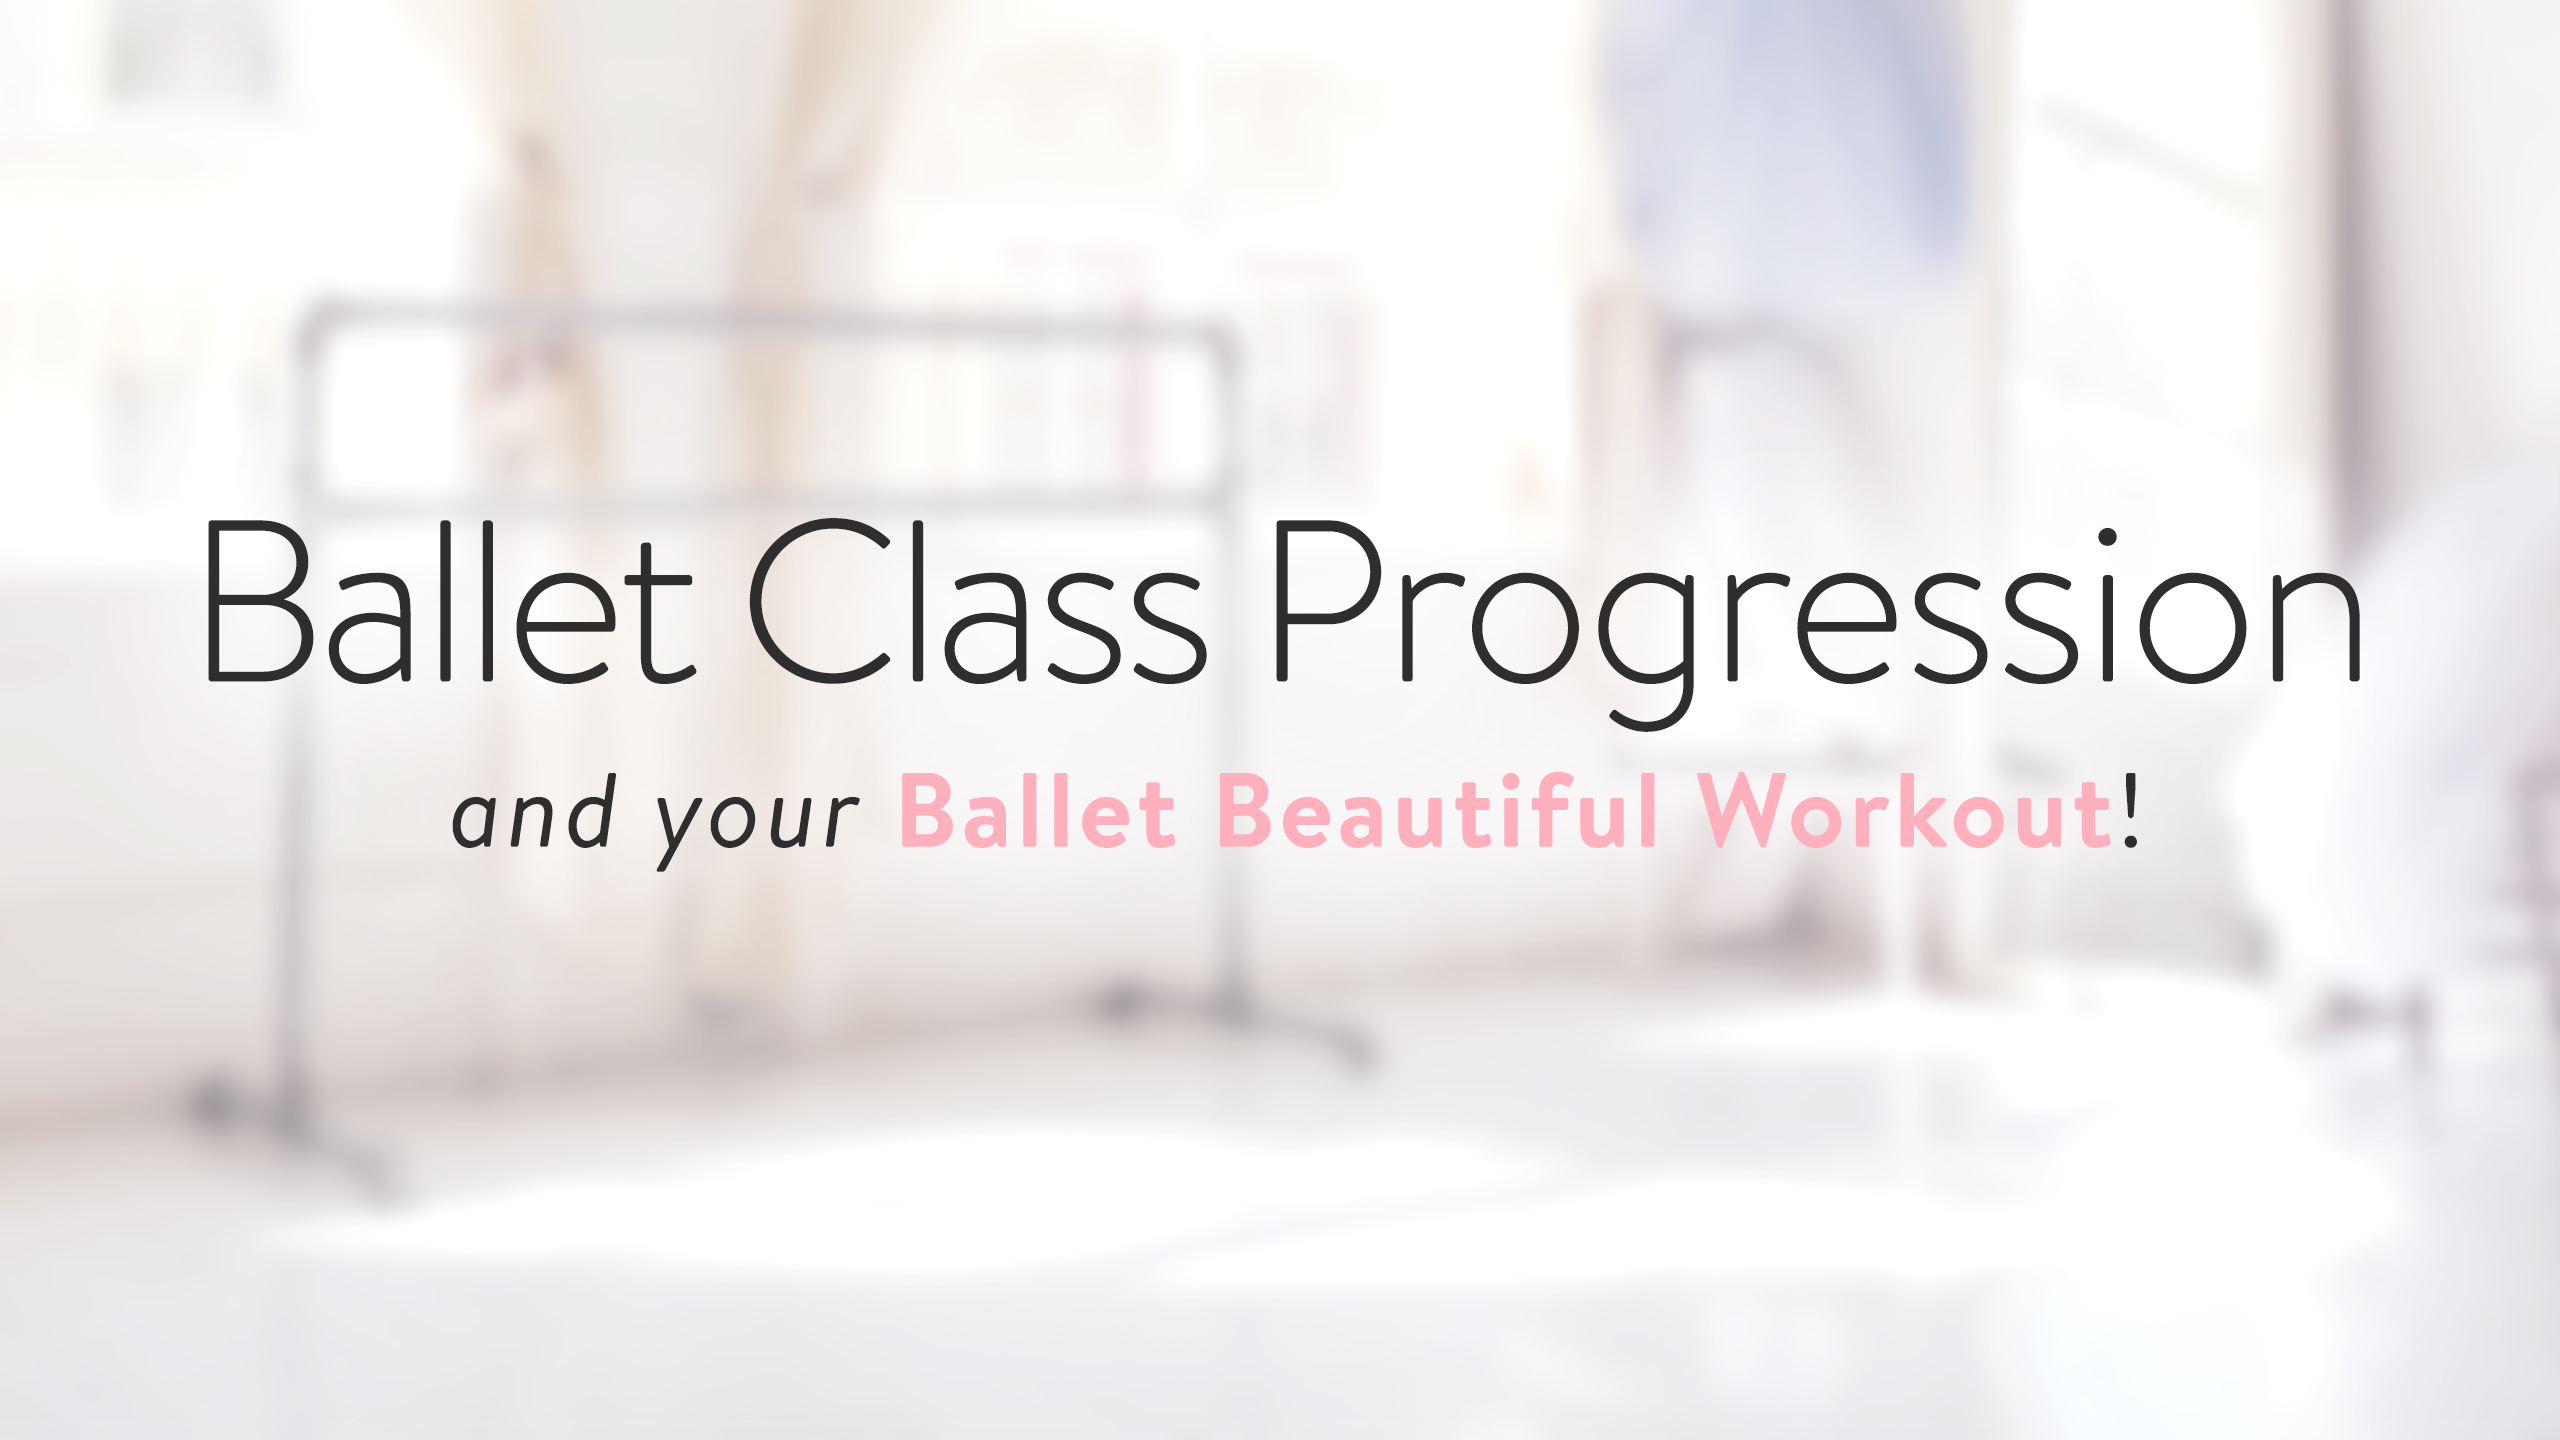 Ballet Class Progression and your Ballet Beautiful Workout!